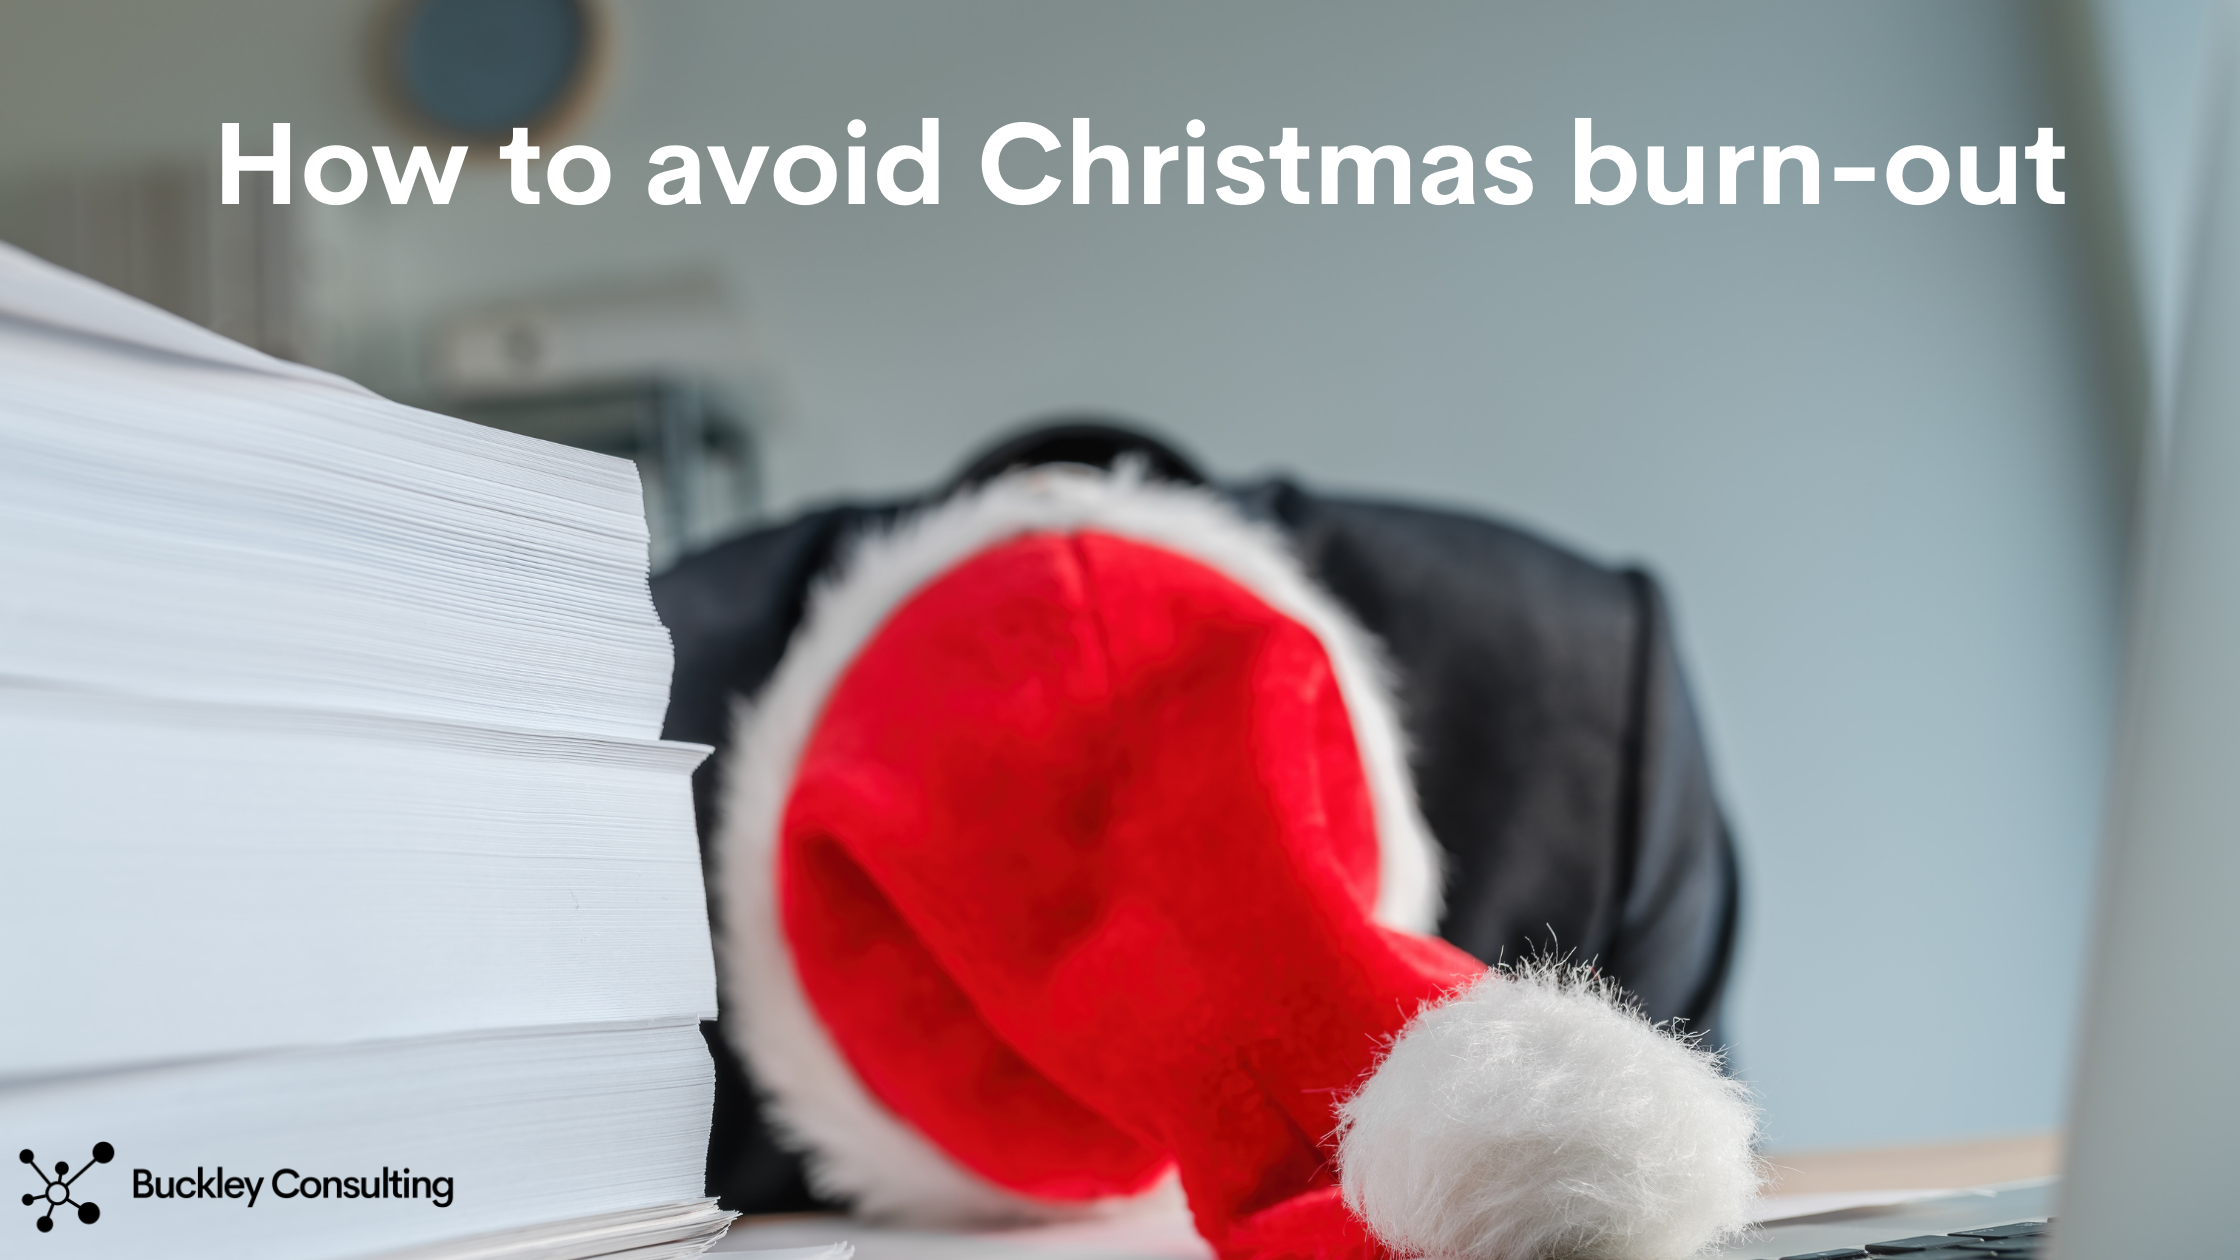 How to avoid Christmas burn-out